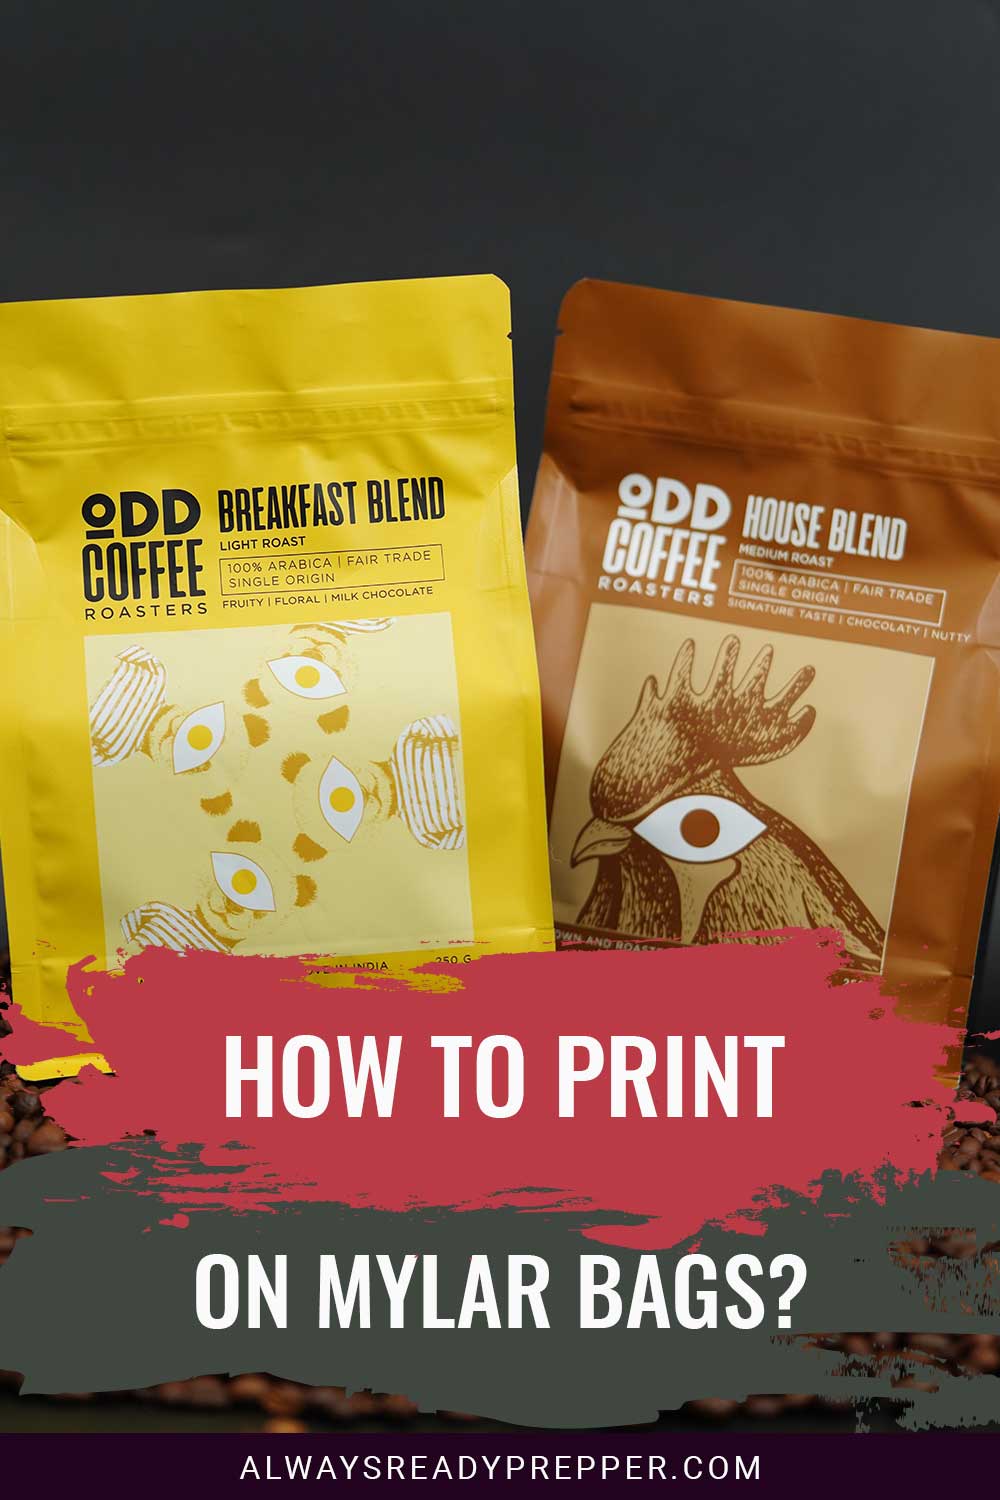 Printed Mylar bags - How to print them?